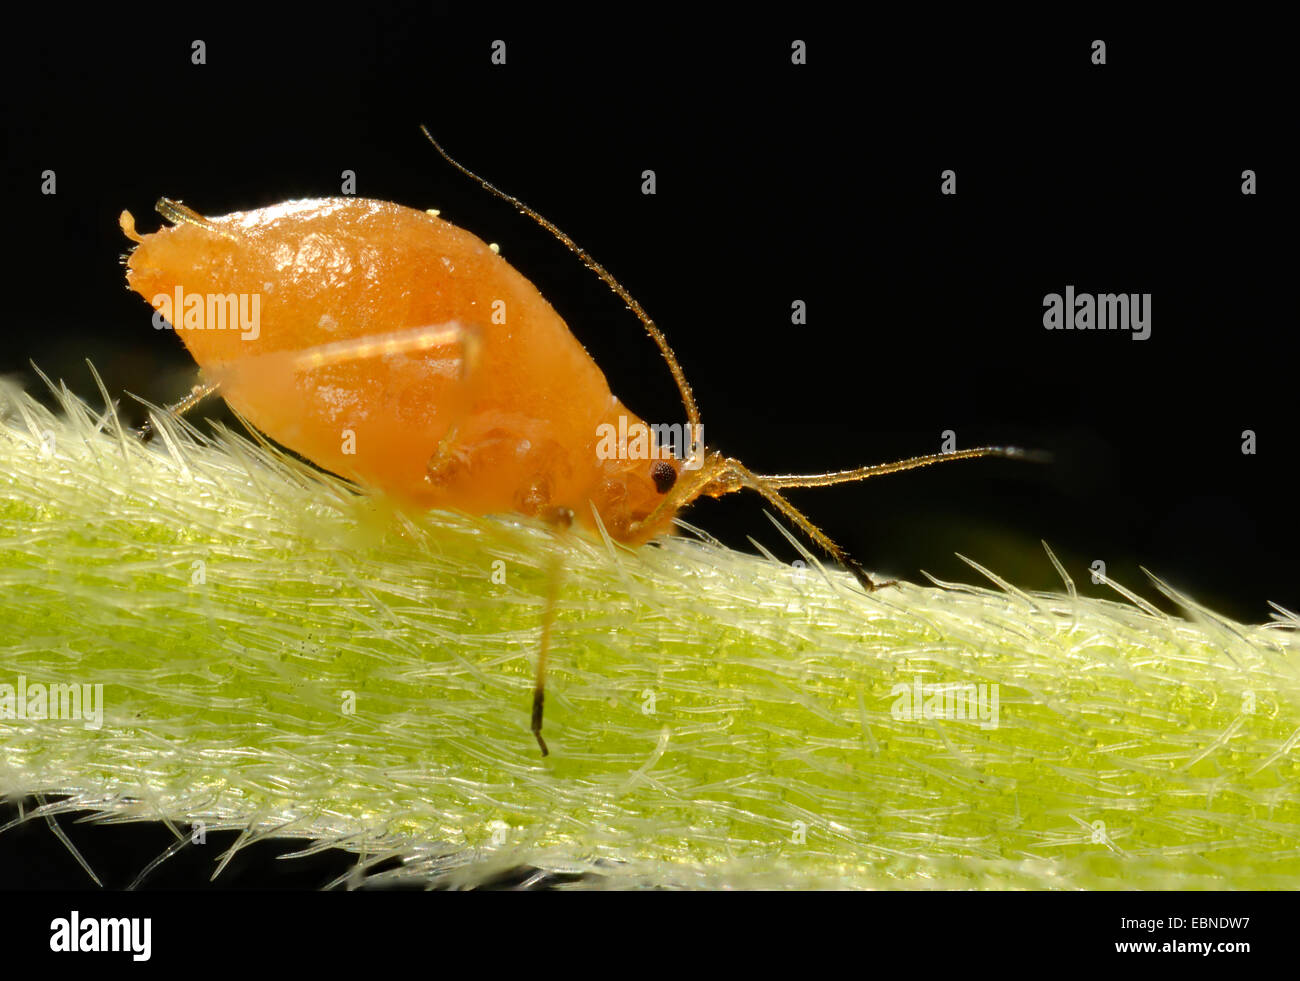 aphids, plant lice (Aphididae), young animal on a pedicel, Germany, Baden-Wuerttemberg Stock Photo